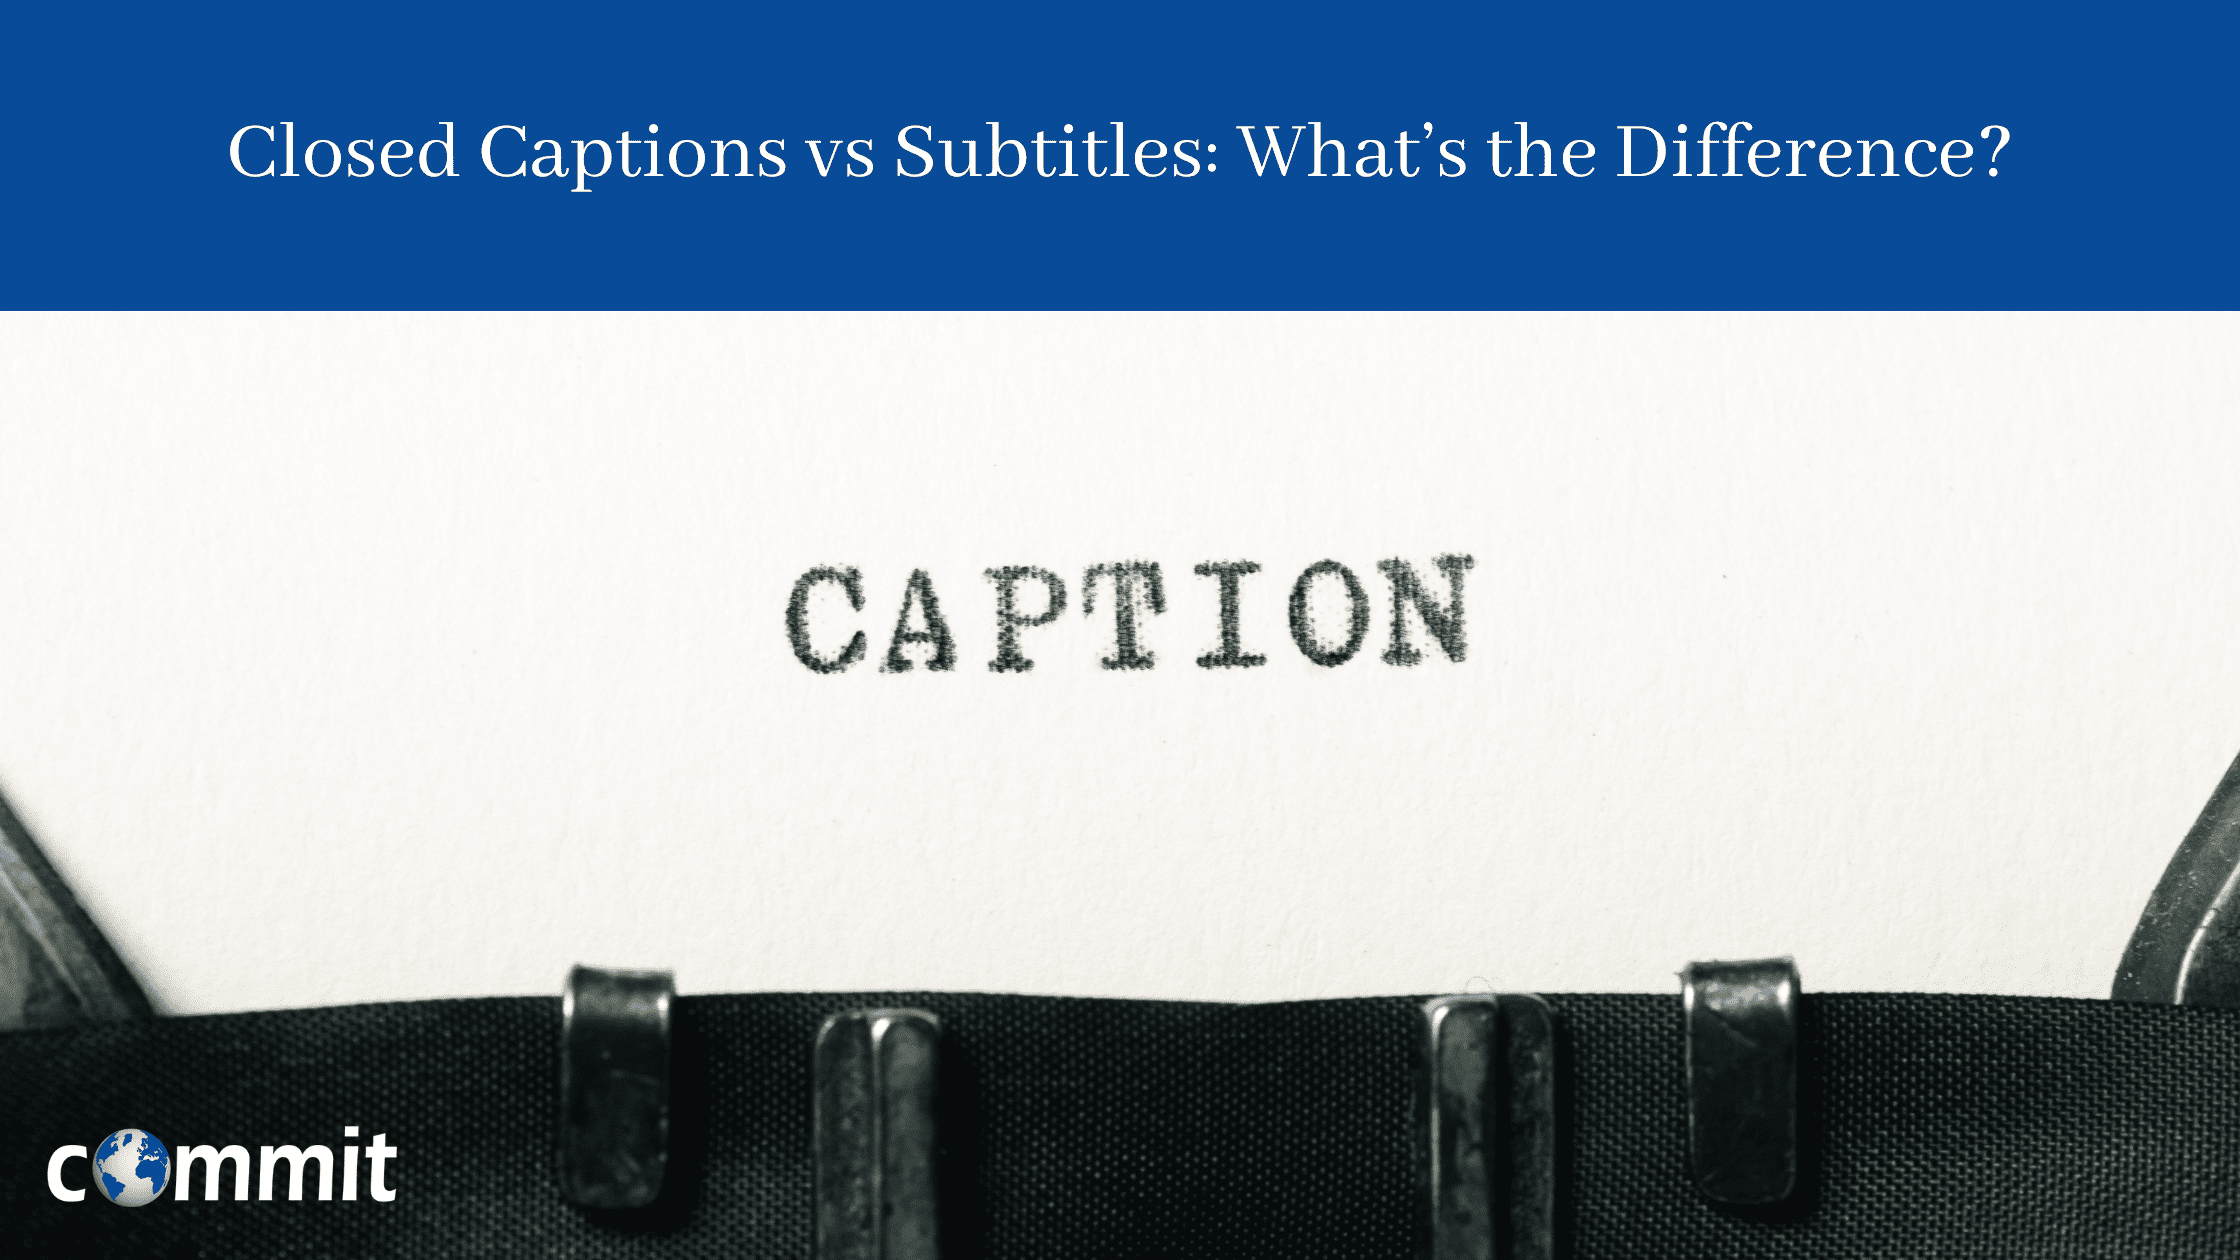 Closed Captions vs Subtitles: What’s the Difference?